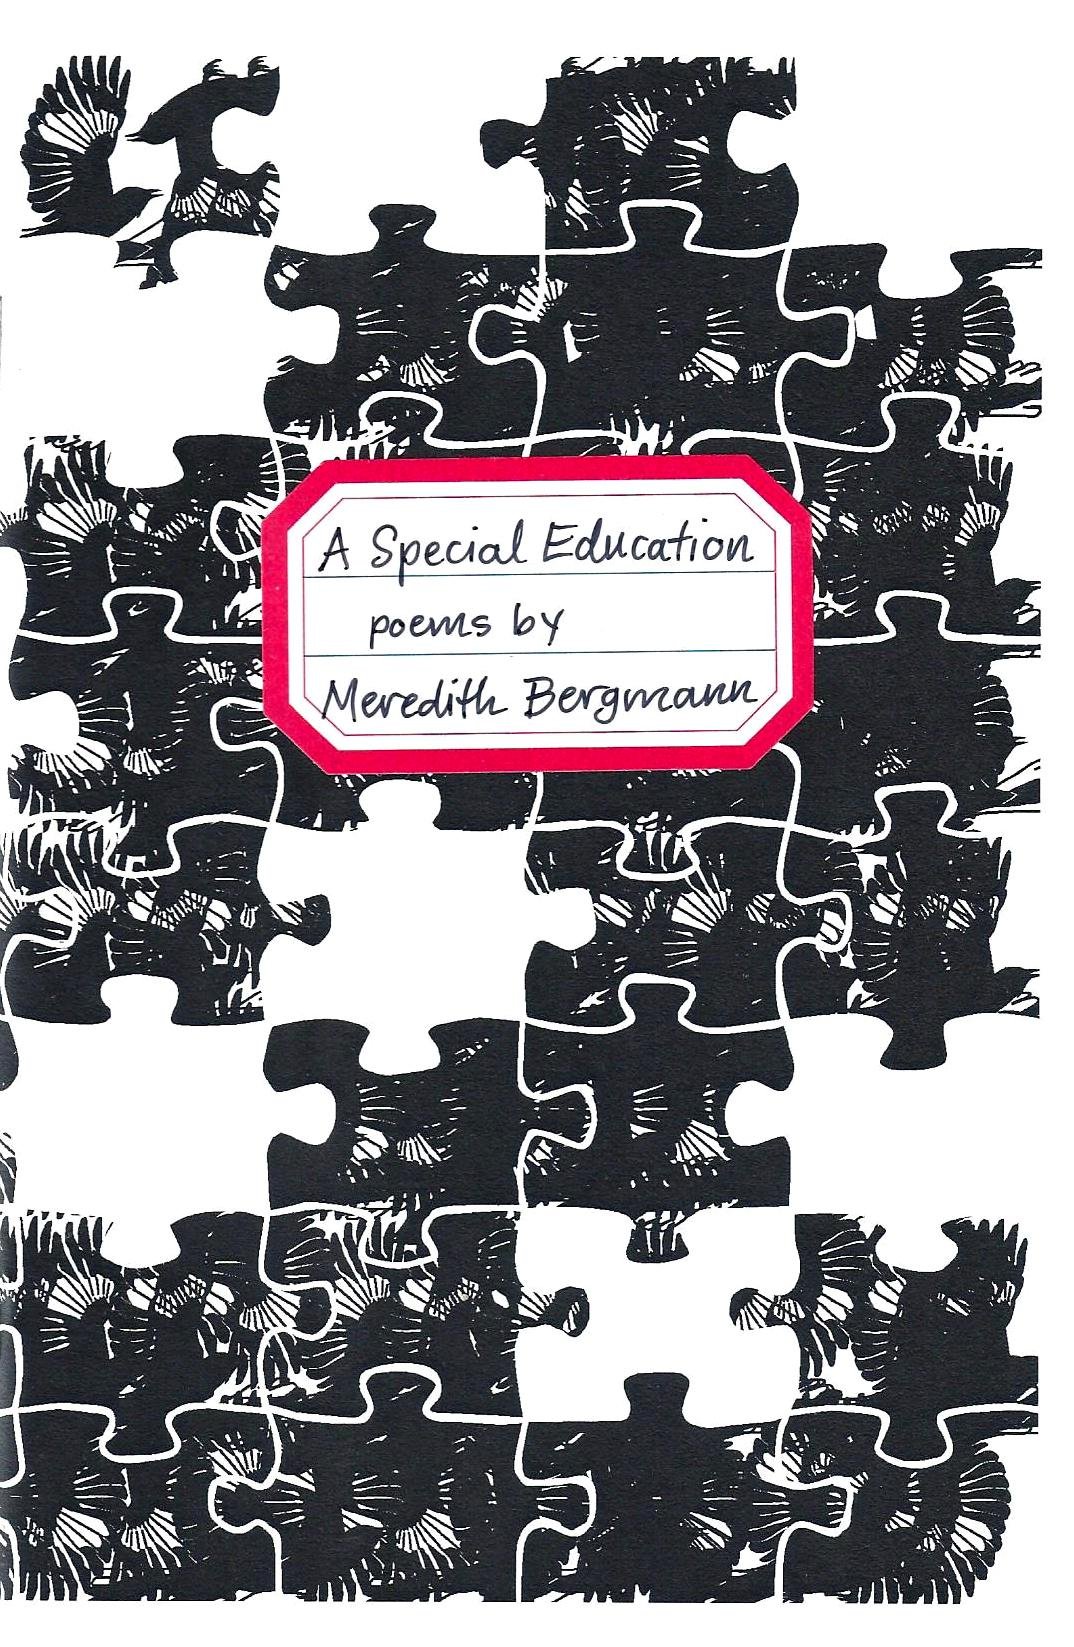 A SPECIAL EDUCATION by Meredith Bergmann